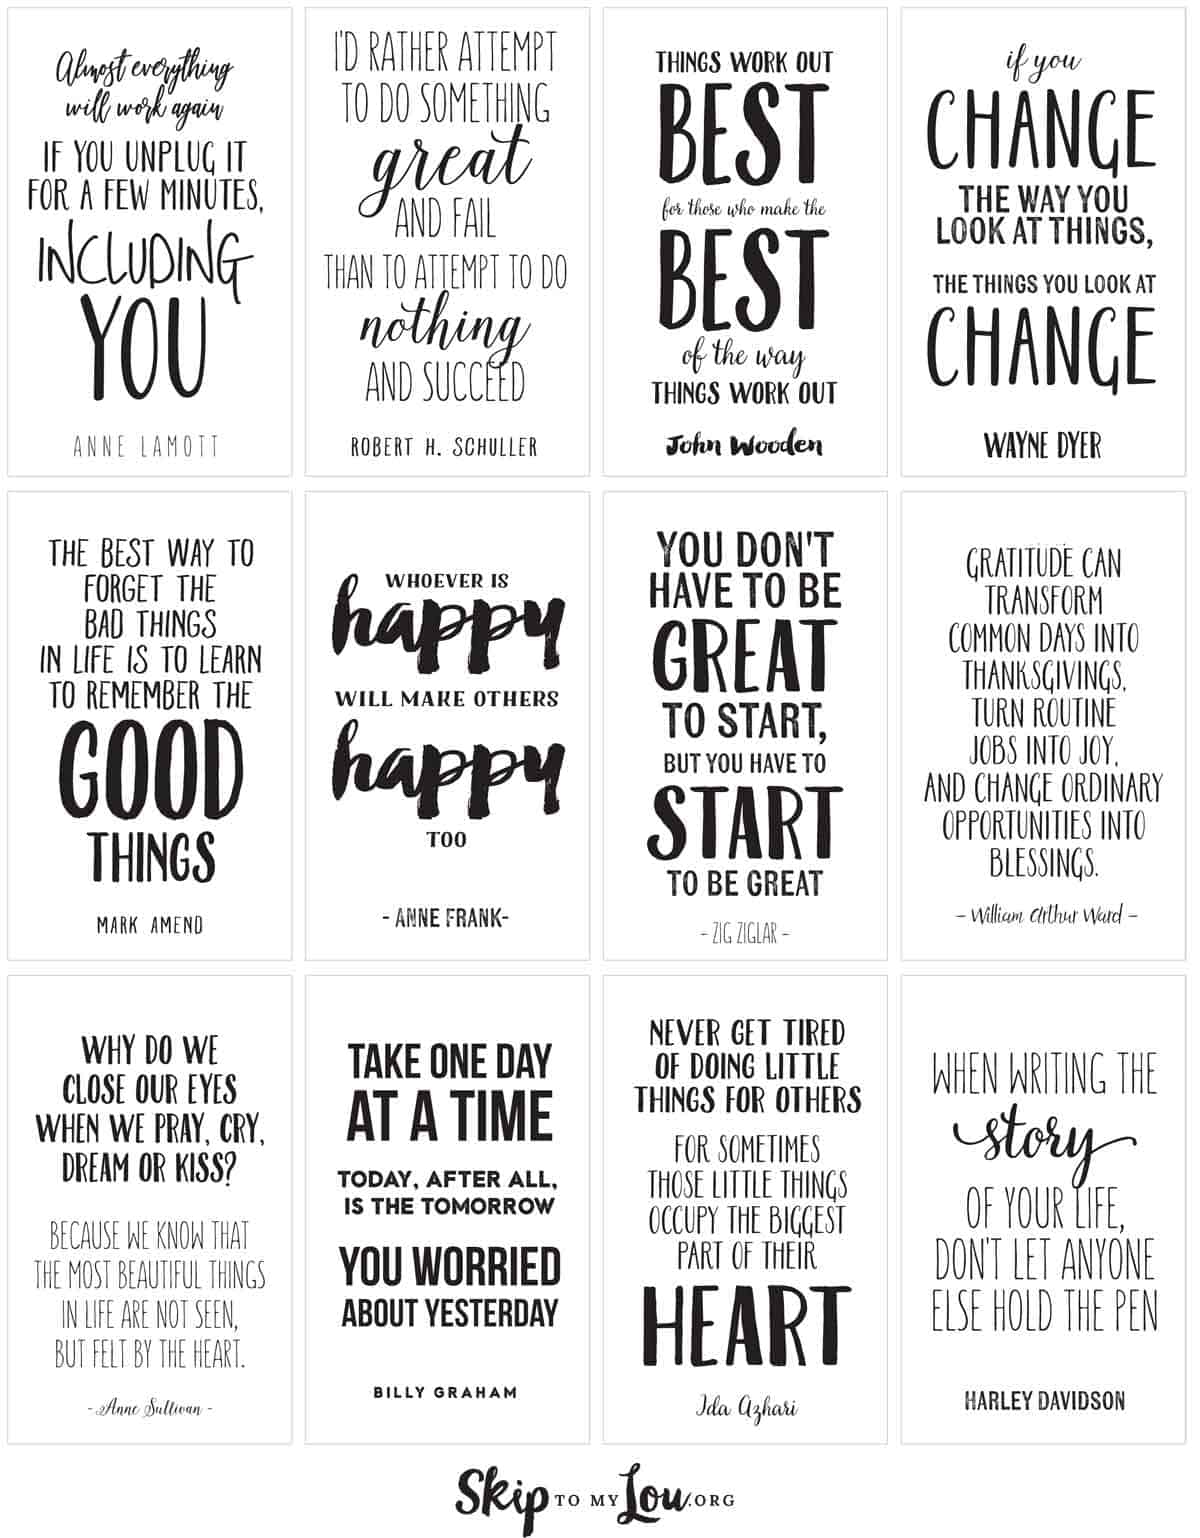 Amazing Life Quotes For Inspiration! {FREE PRINTABLE CARDS} | Skip To My Lou